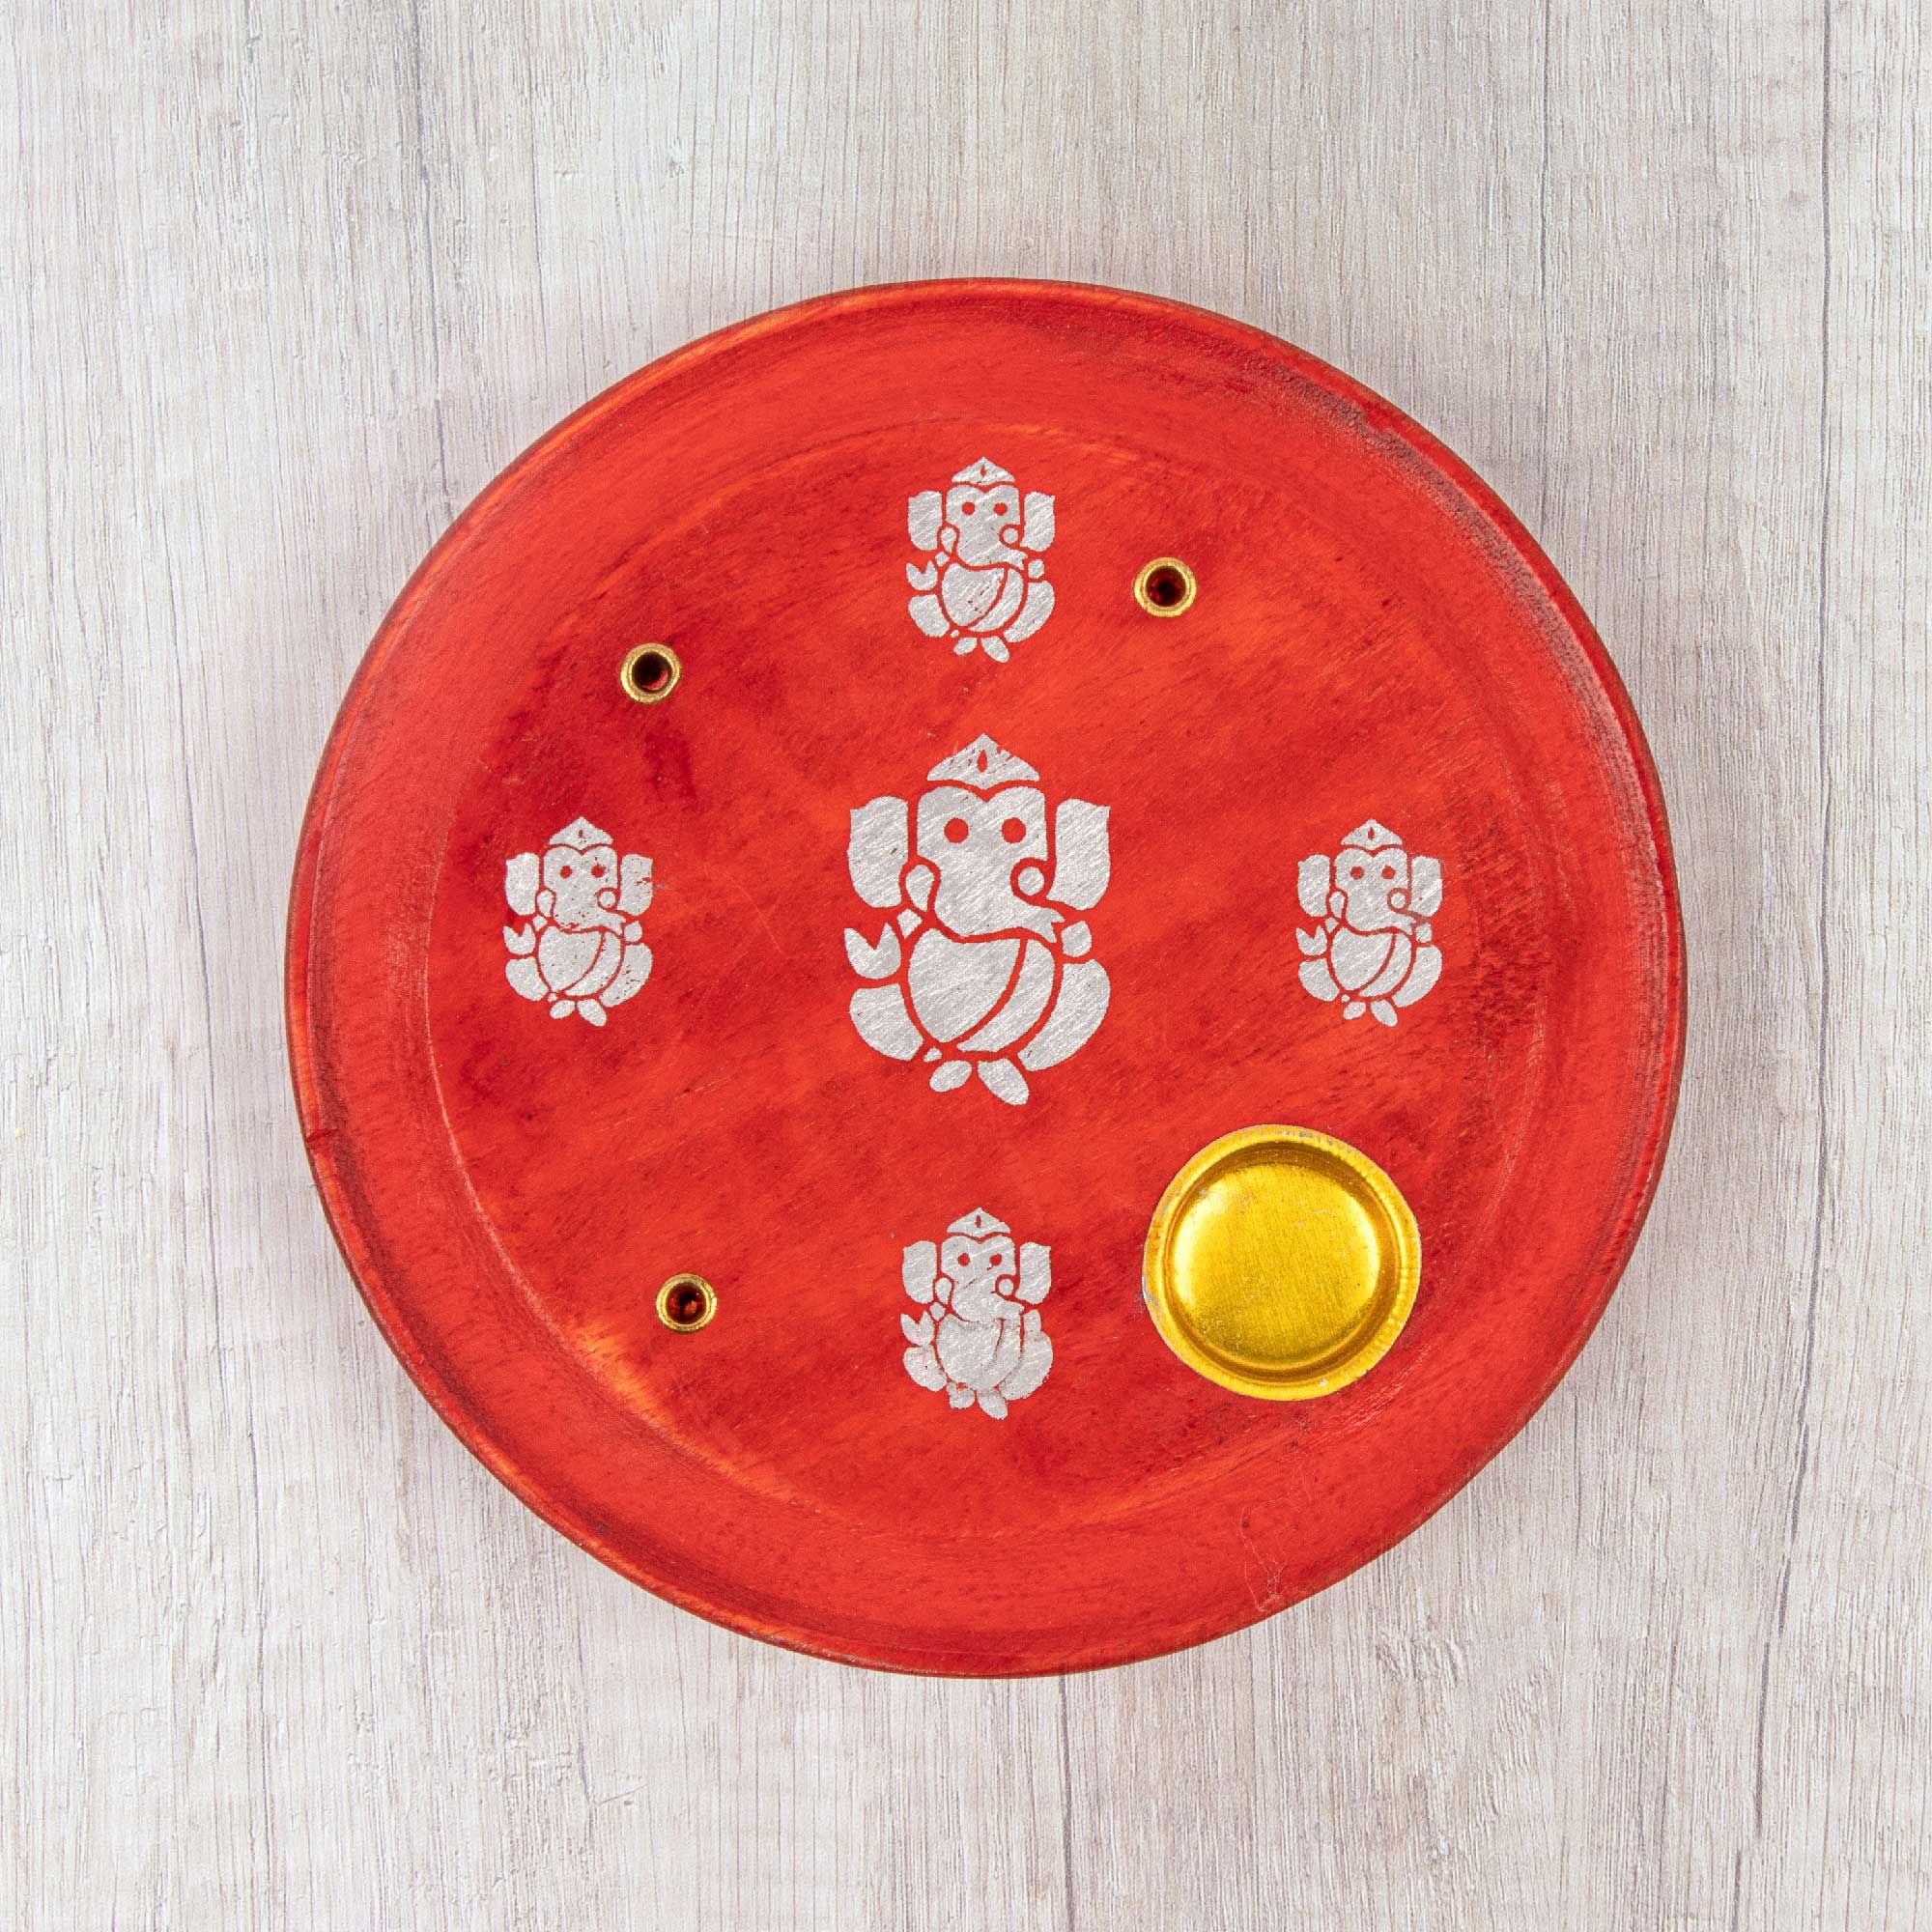 Incense Cone Plate - Elephant Red